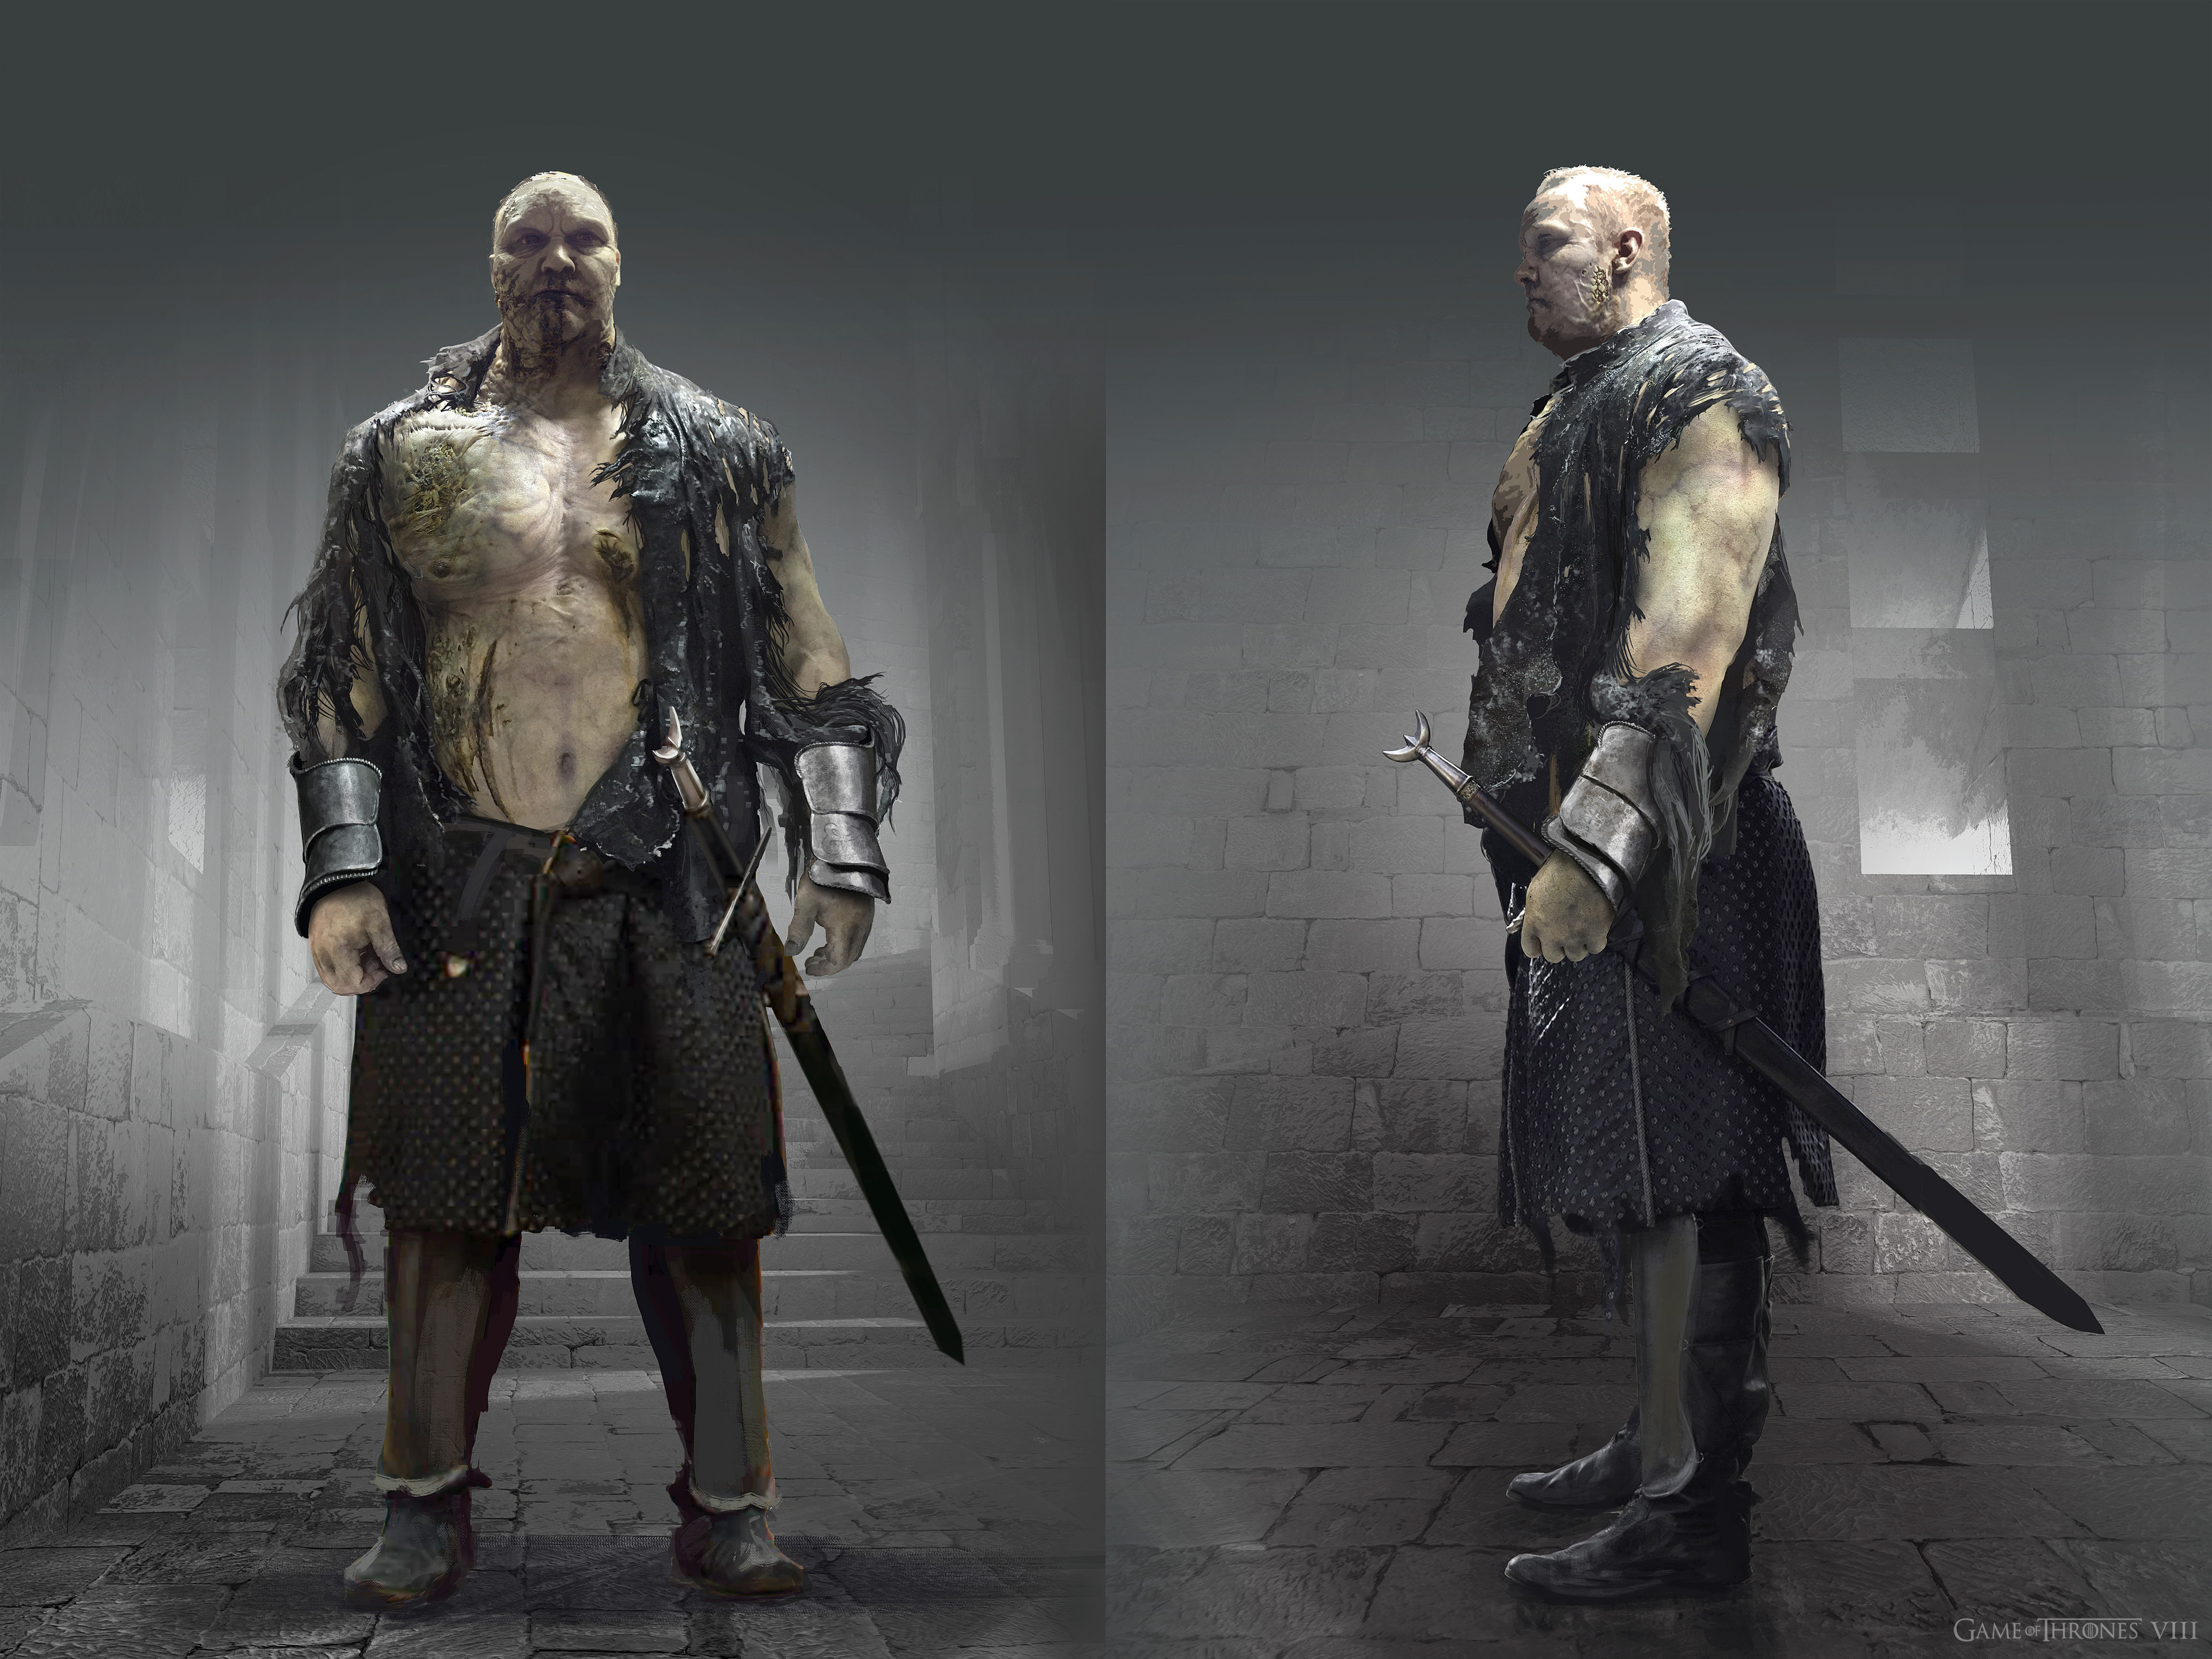 Working with Producer Bernie Caulfield I produced this concept for how The Mountain would look after tearing off his Armour